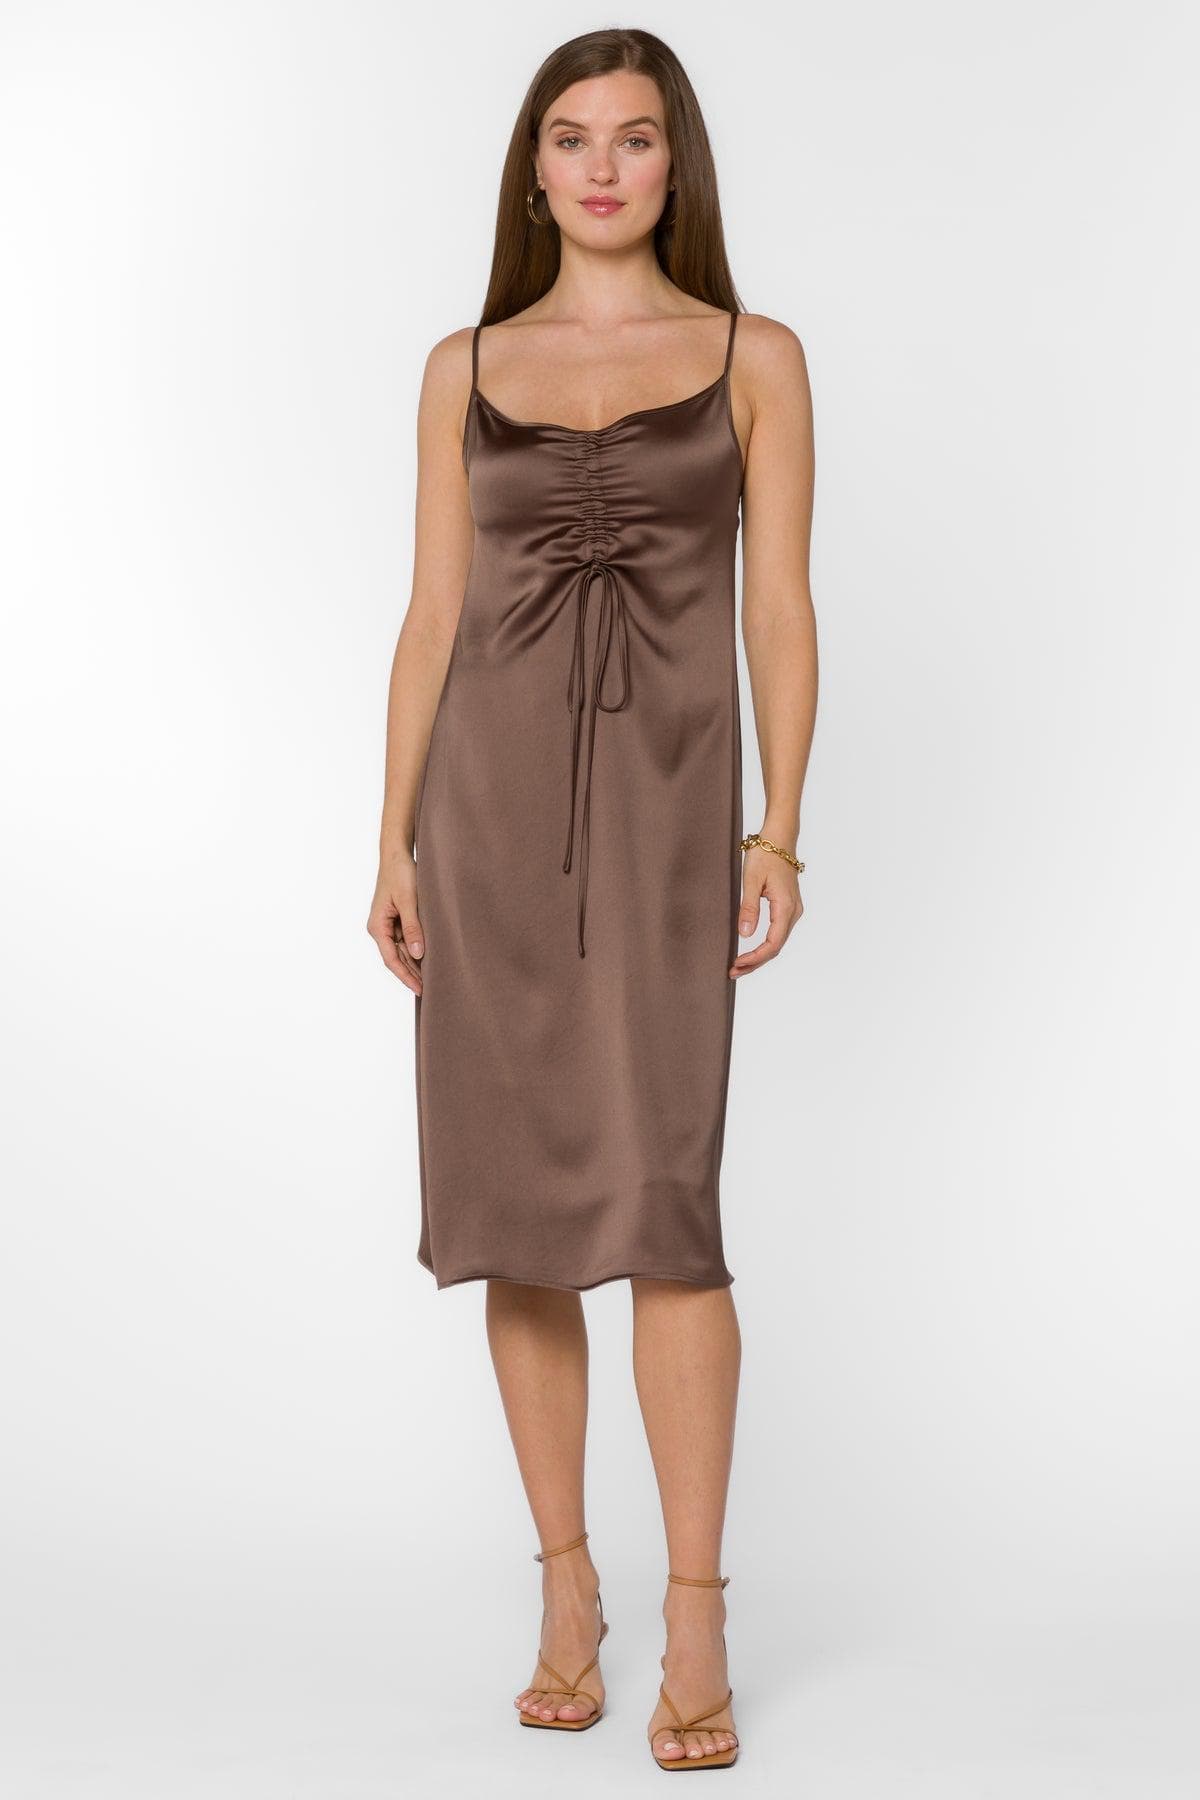 Luxe Mocha Ruched Slip Dress Dresses Scout and Poppy Fashion Boutique